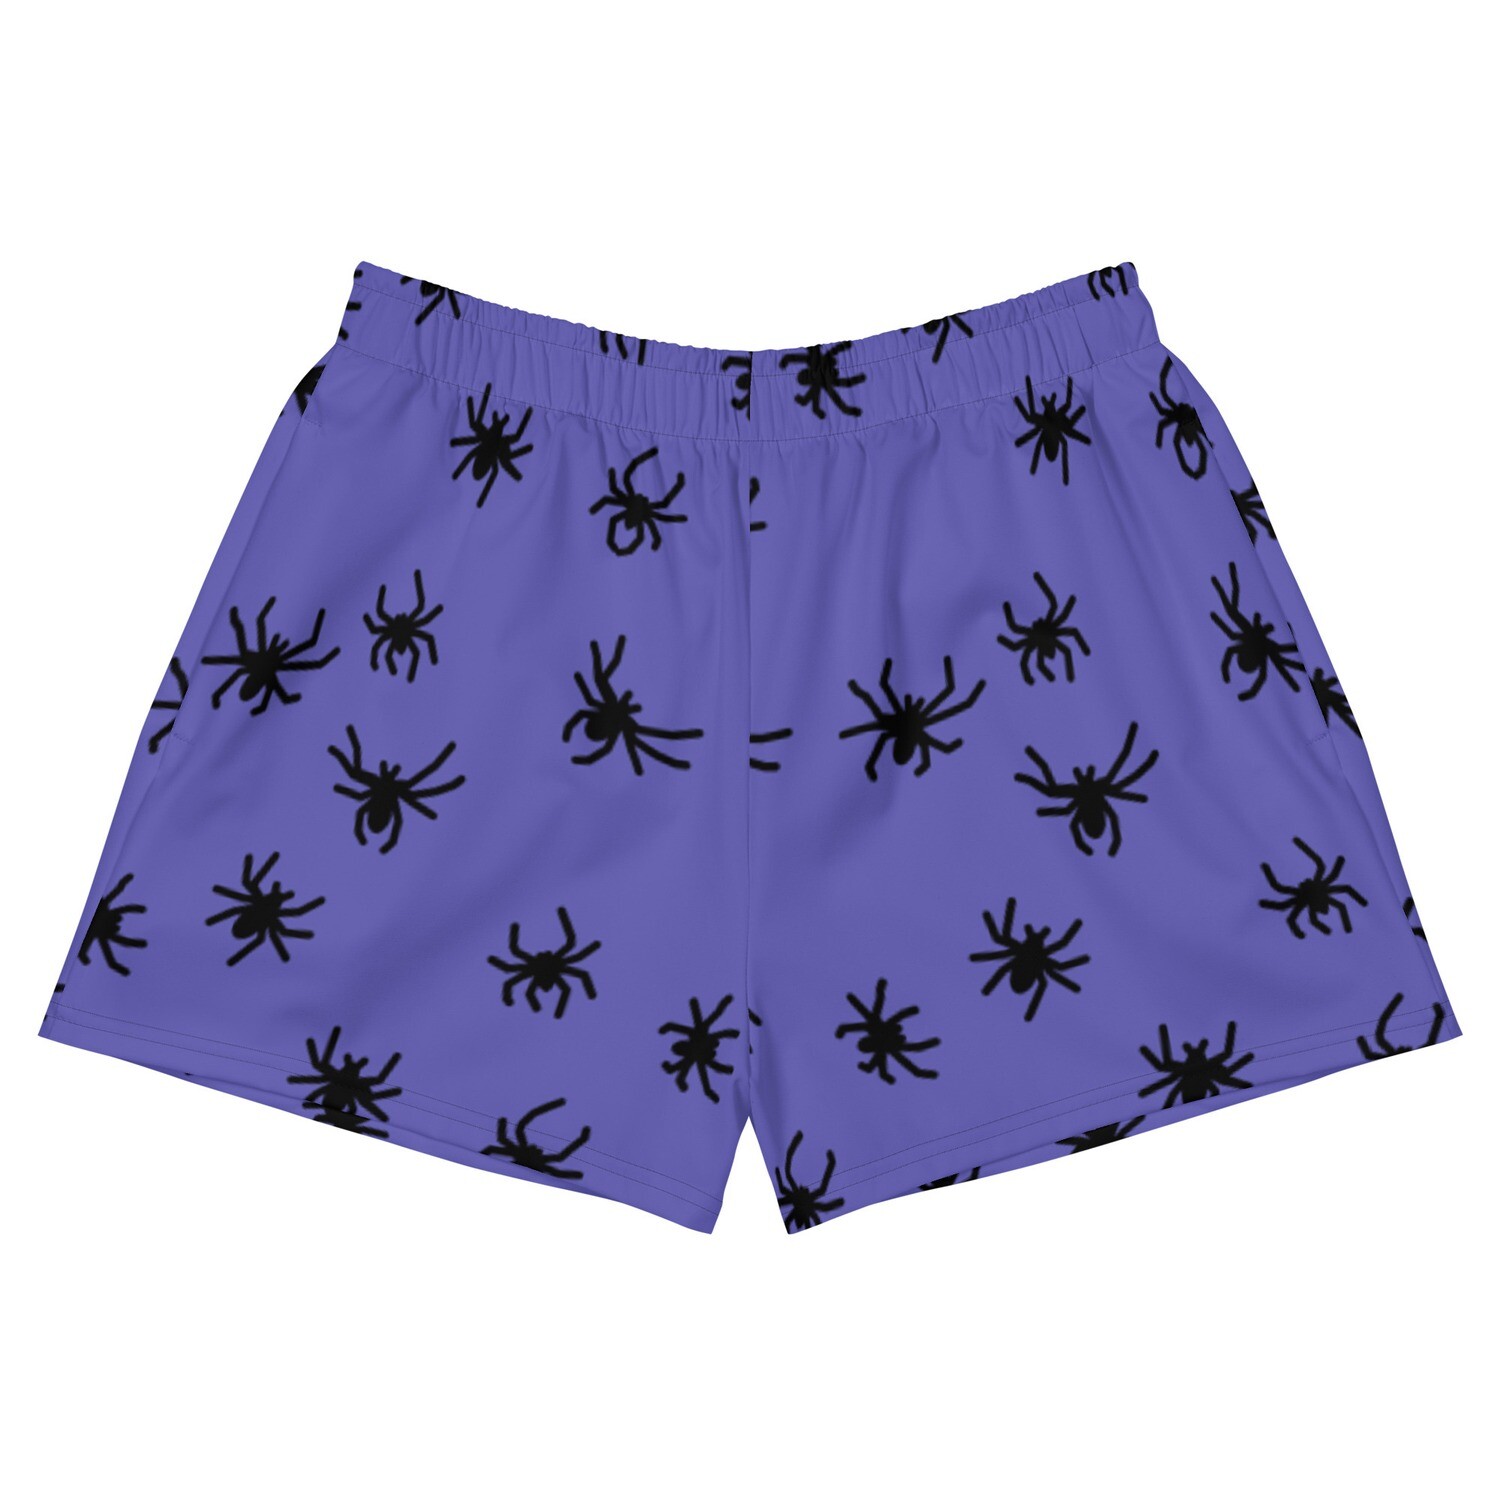 Spiders Women's Athletic Short Shorts